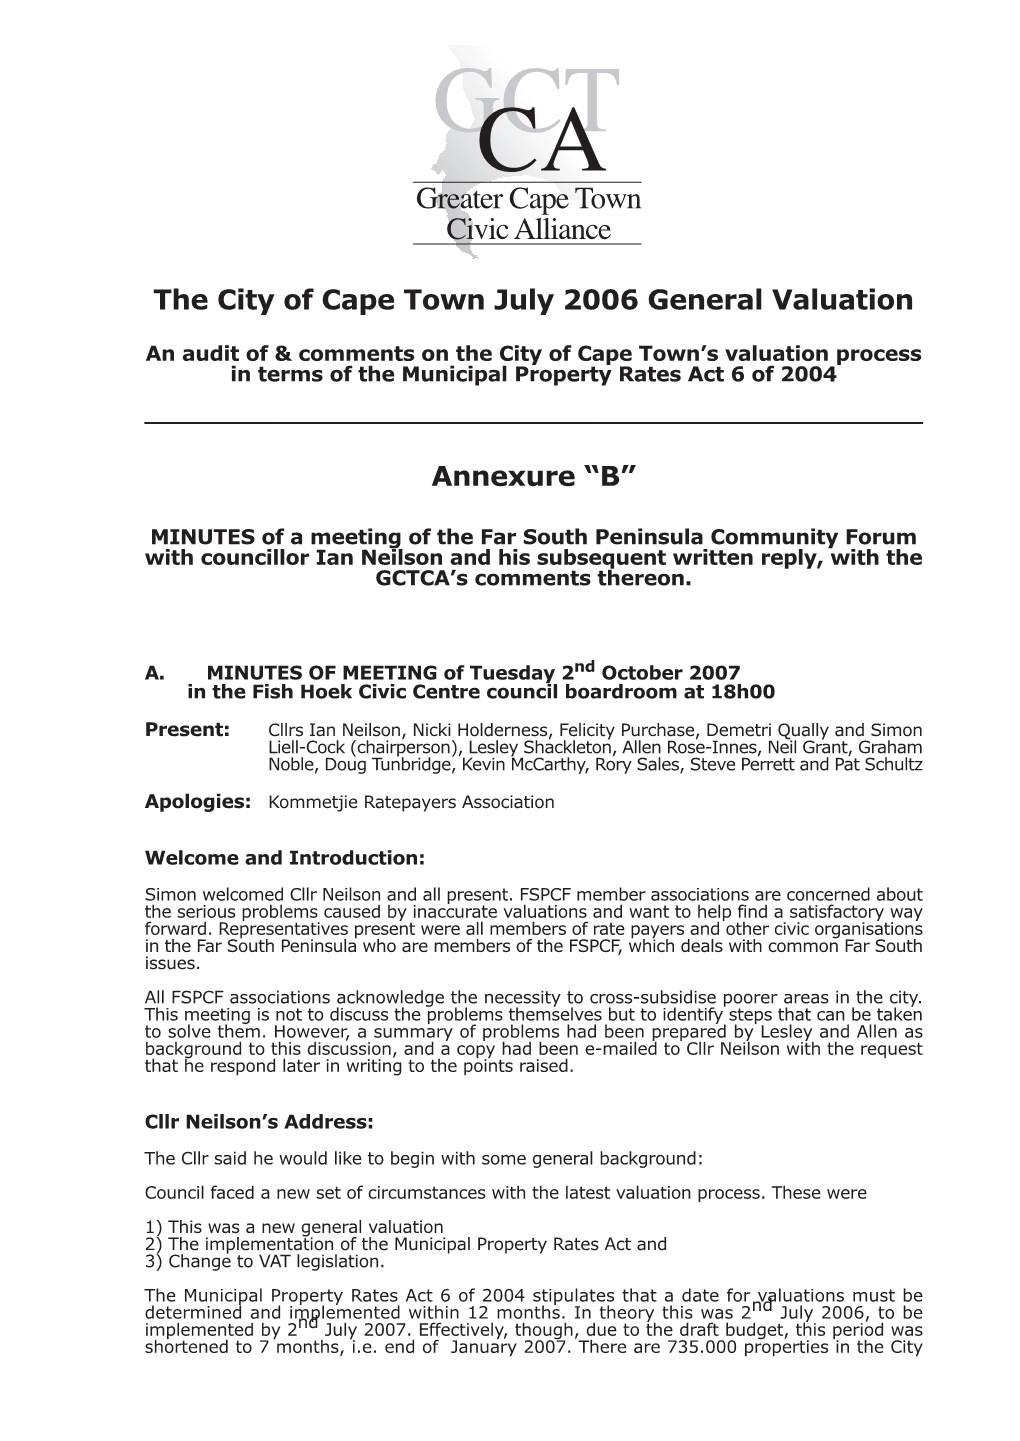 The City of Cape Town July 2006 General Valuation Annexure